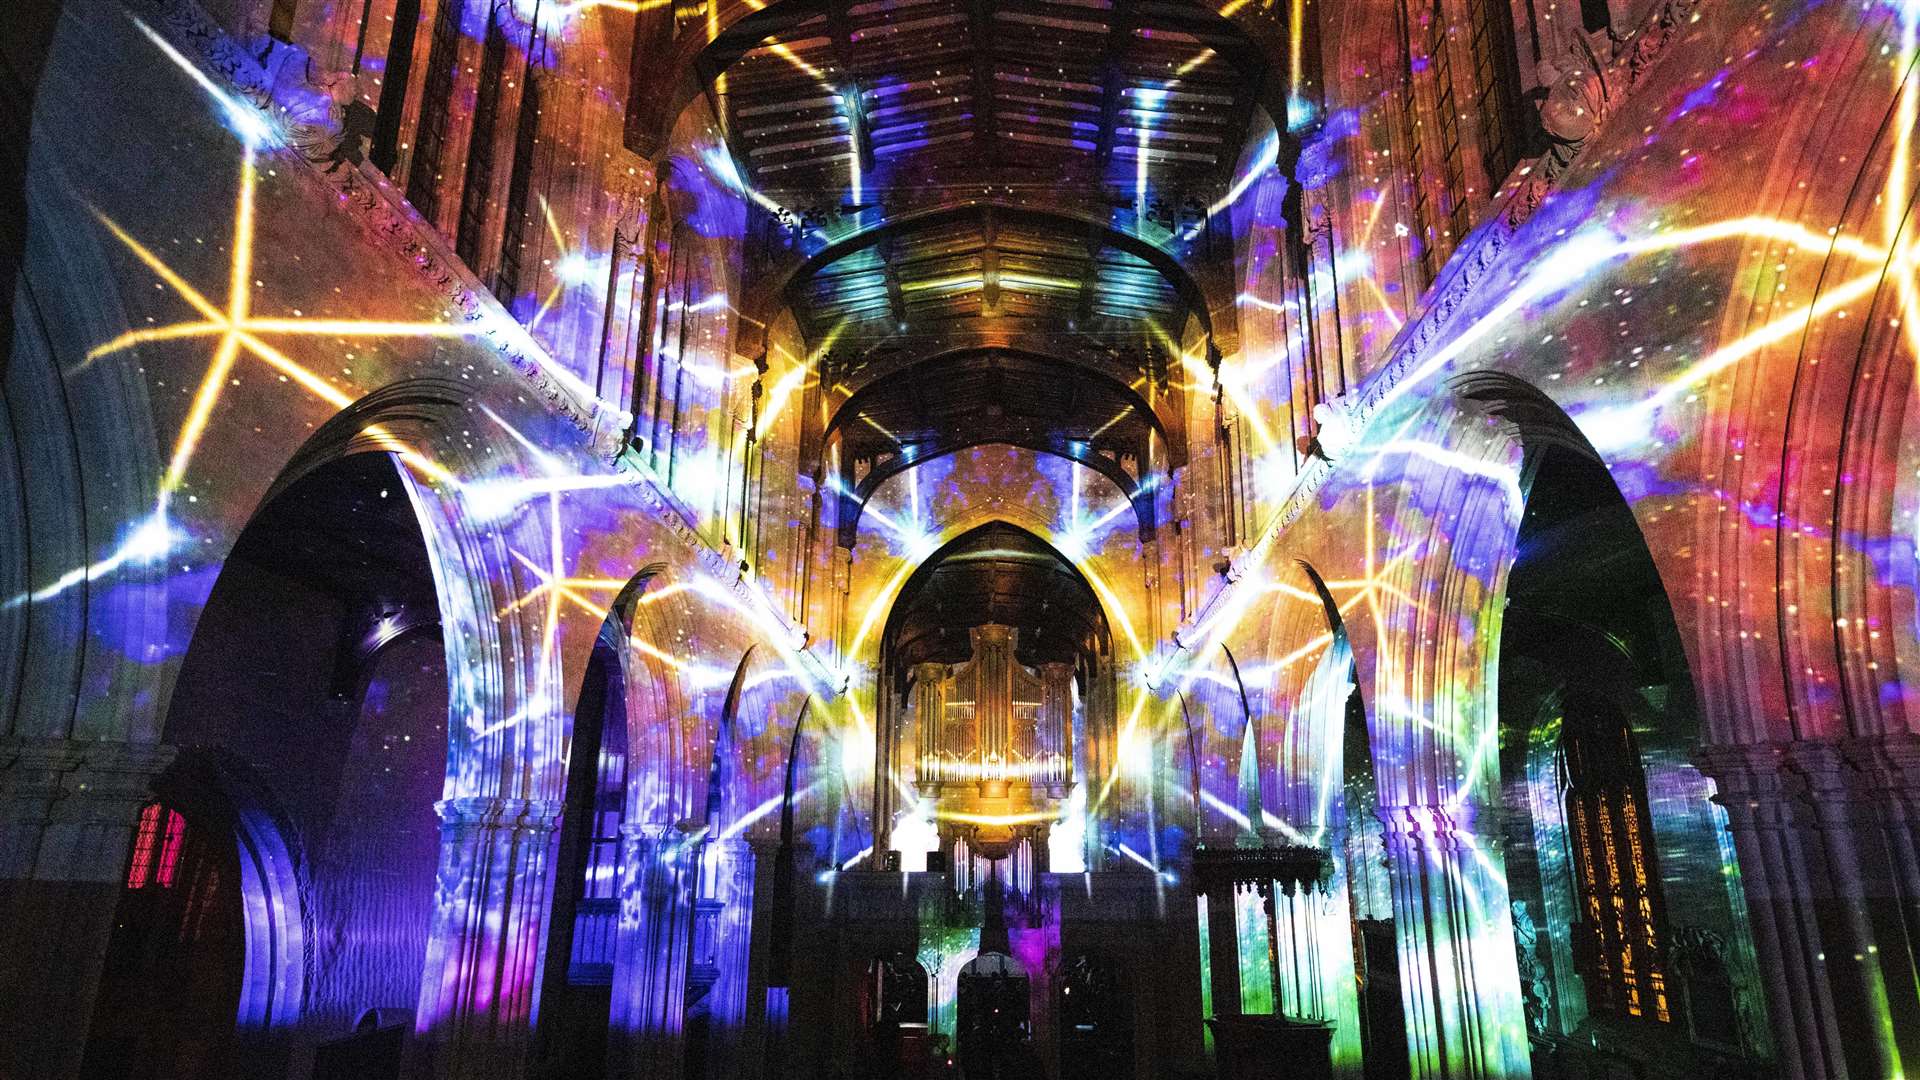 Space Voyage’ lightshow by Luxmuralis is coming to Rochester Cathedral